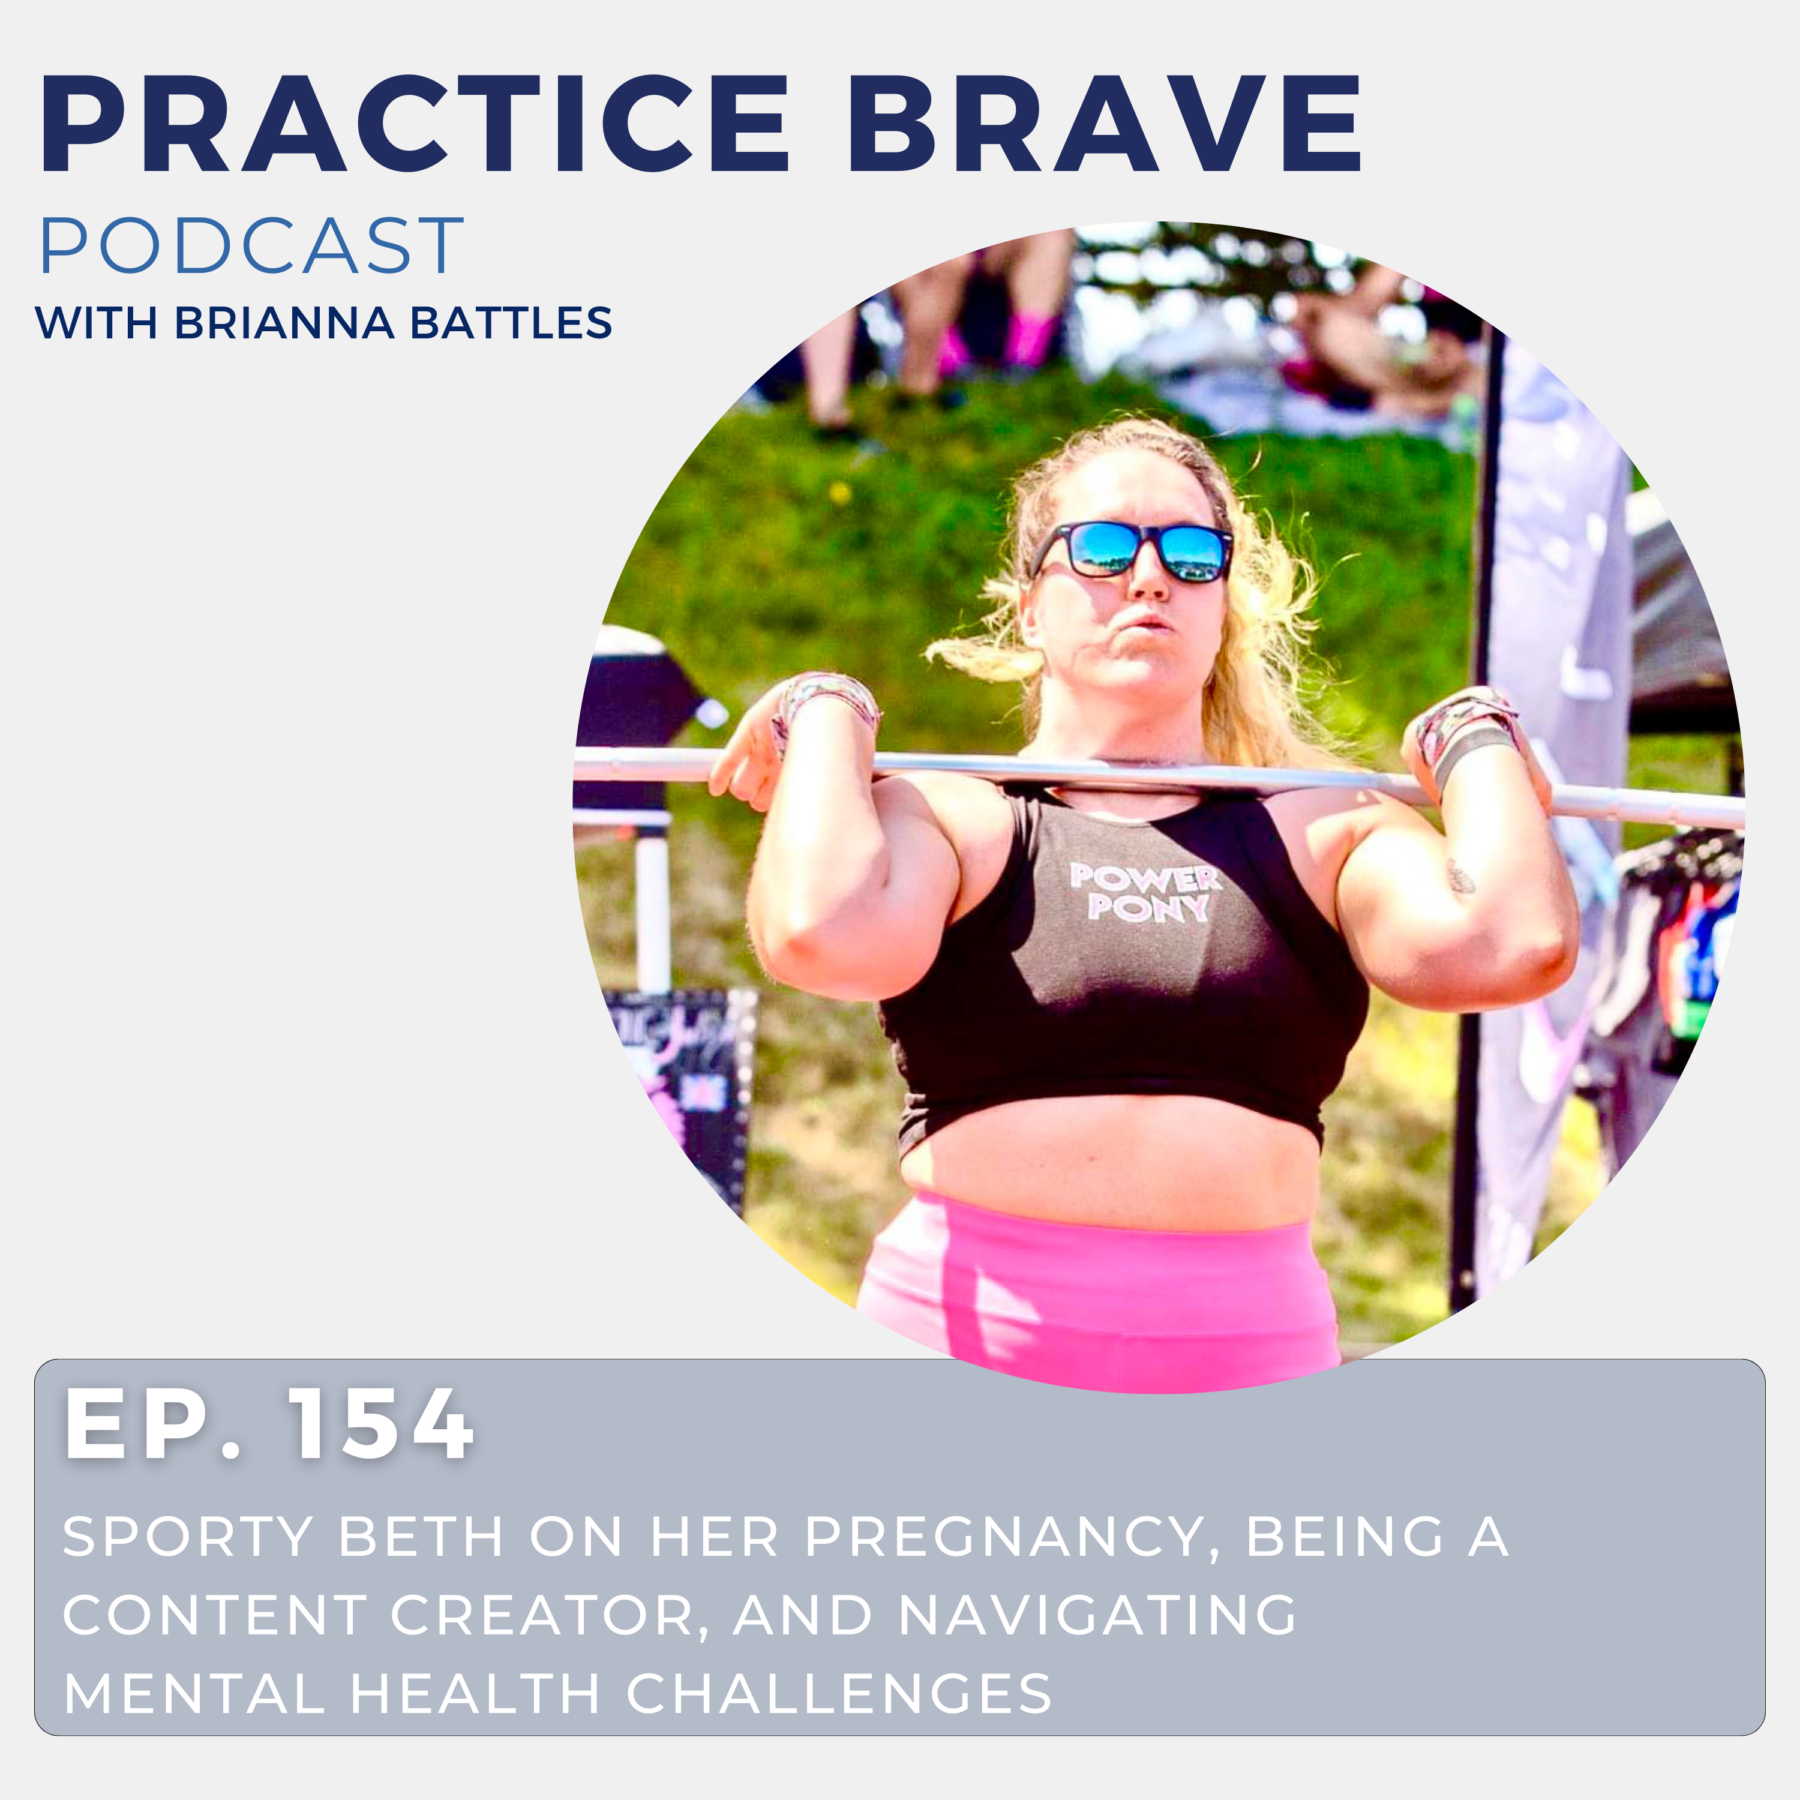 154: Sporty Beth on Her Pregnancy, Being a Content Creator, and Navigating Mental Health Challenges